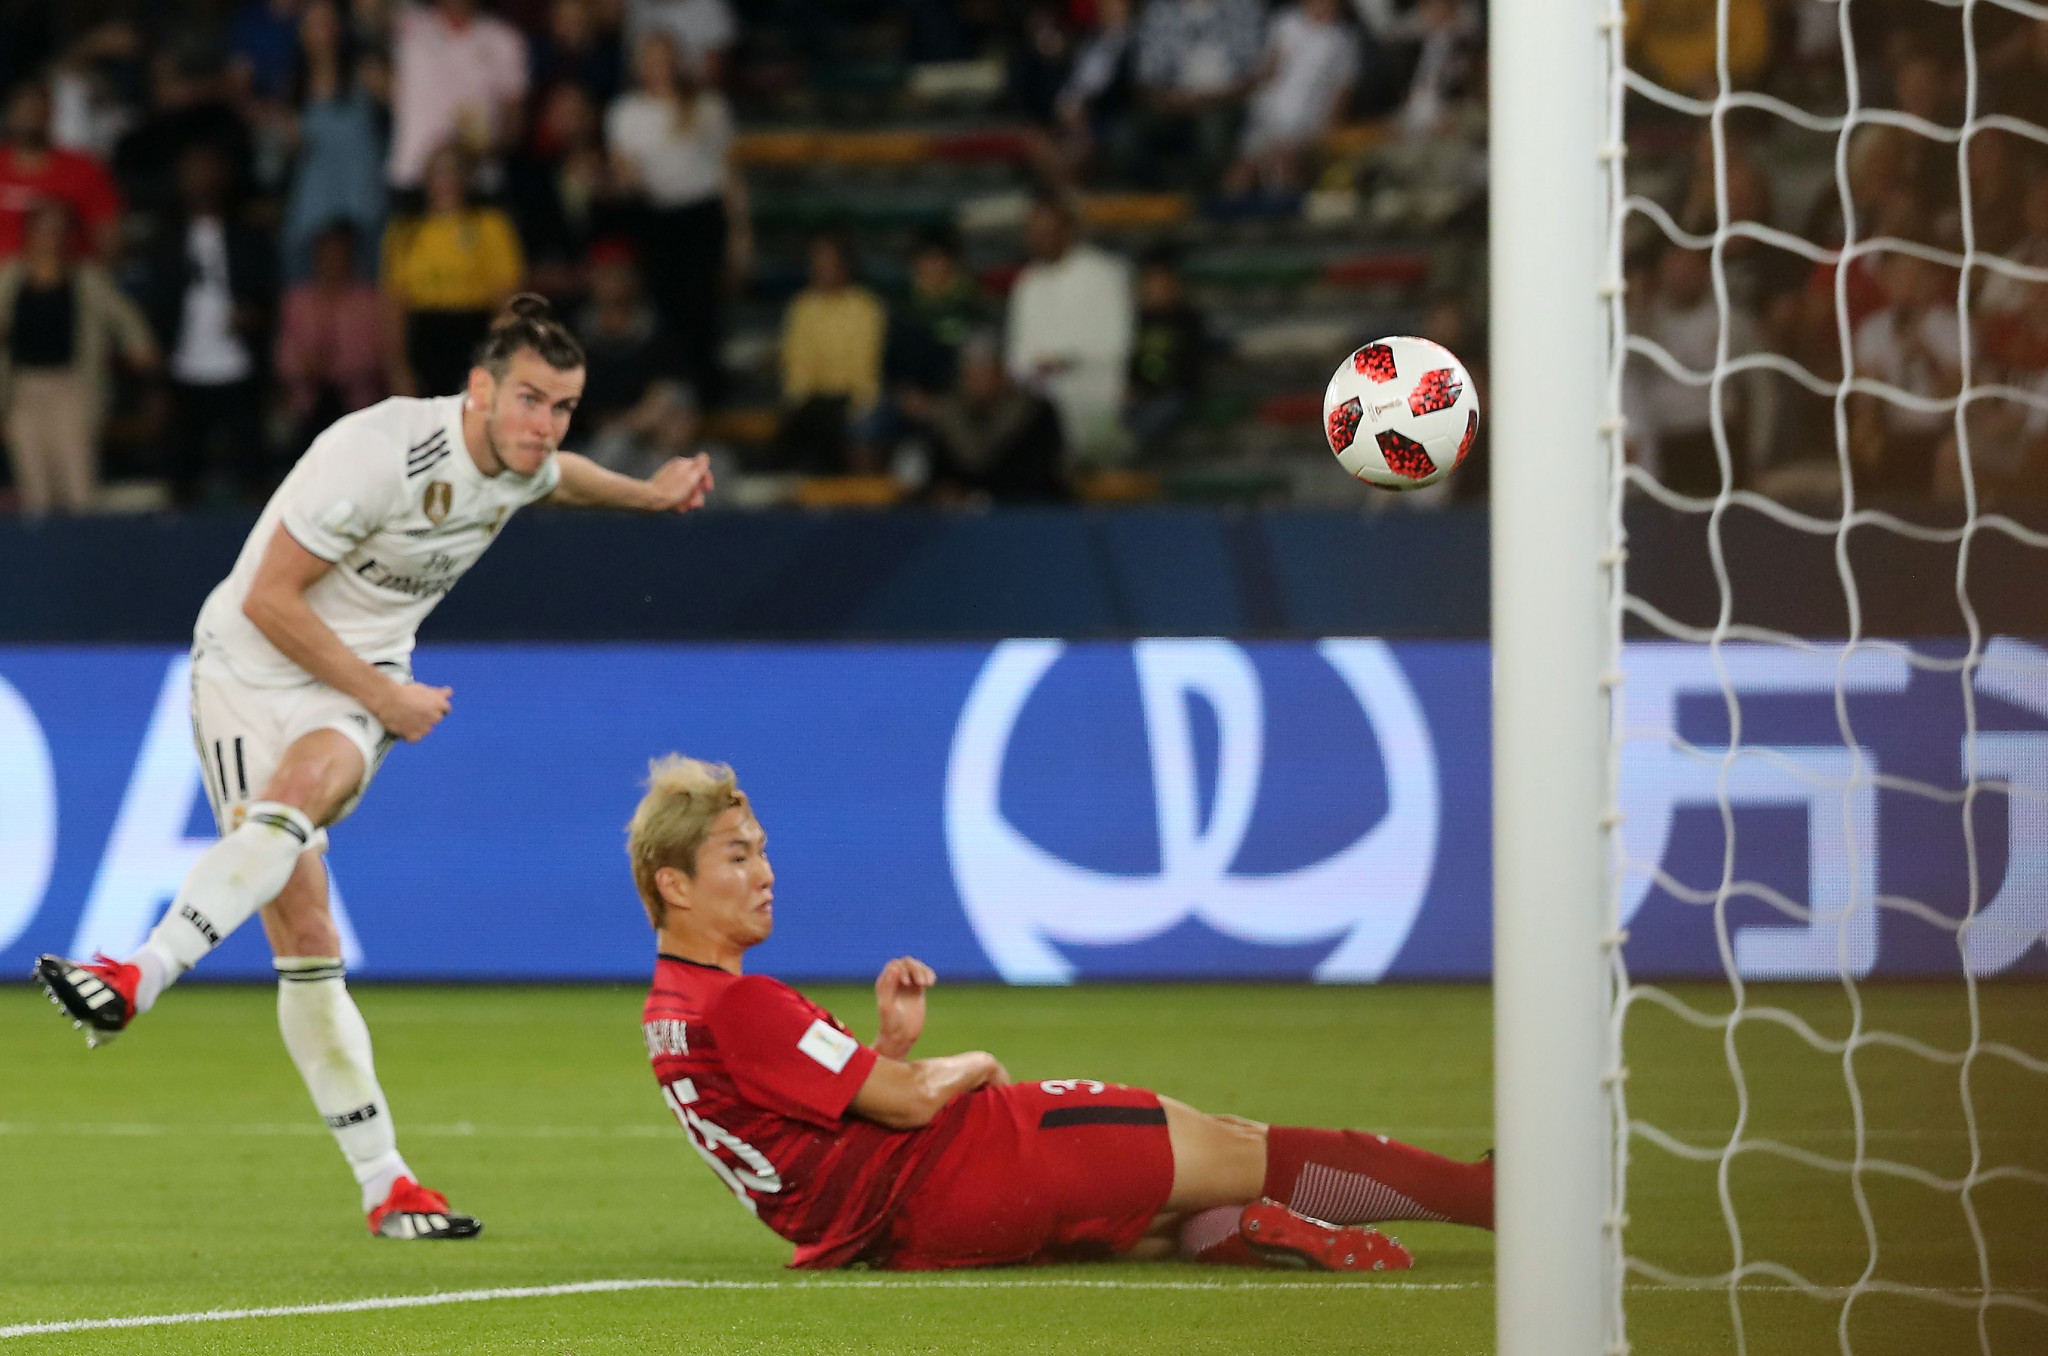 Bale hat-trick sees Real Madrid power past Kashima Antlers at FIFA Club World Cup